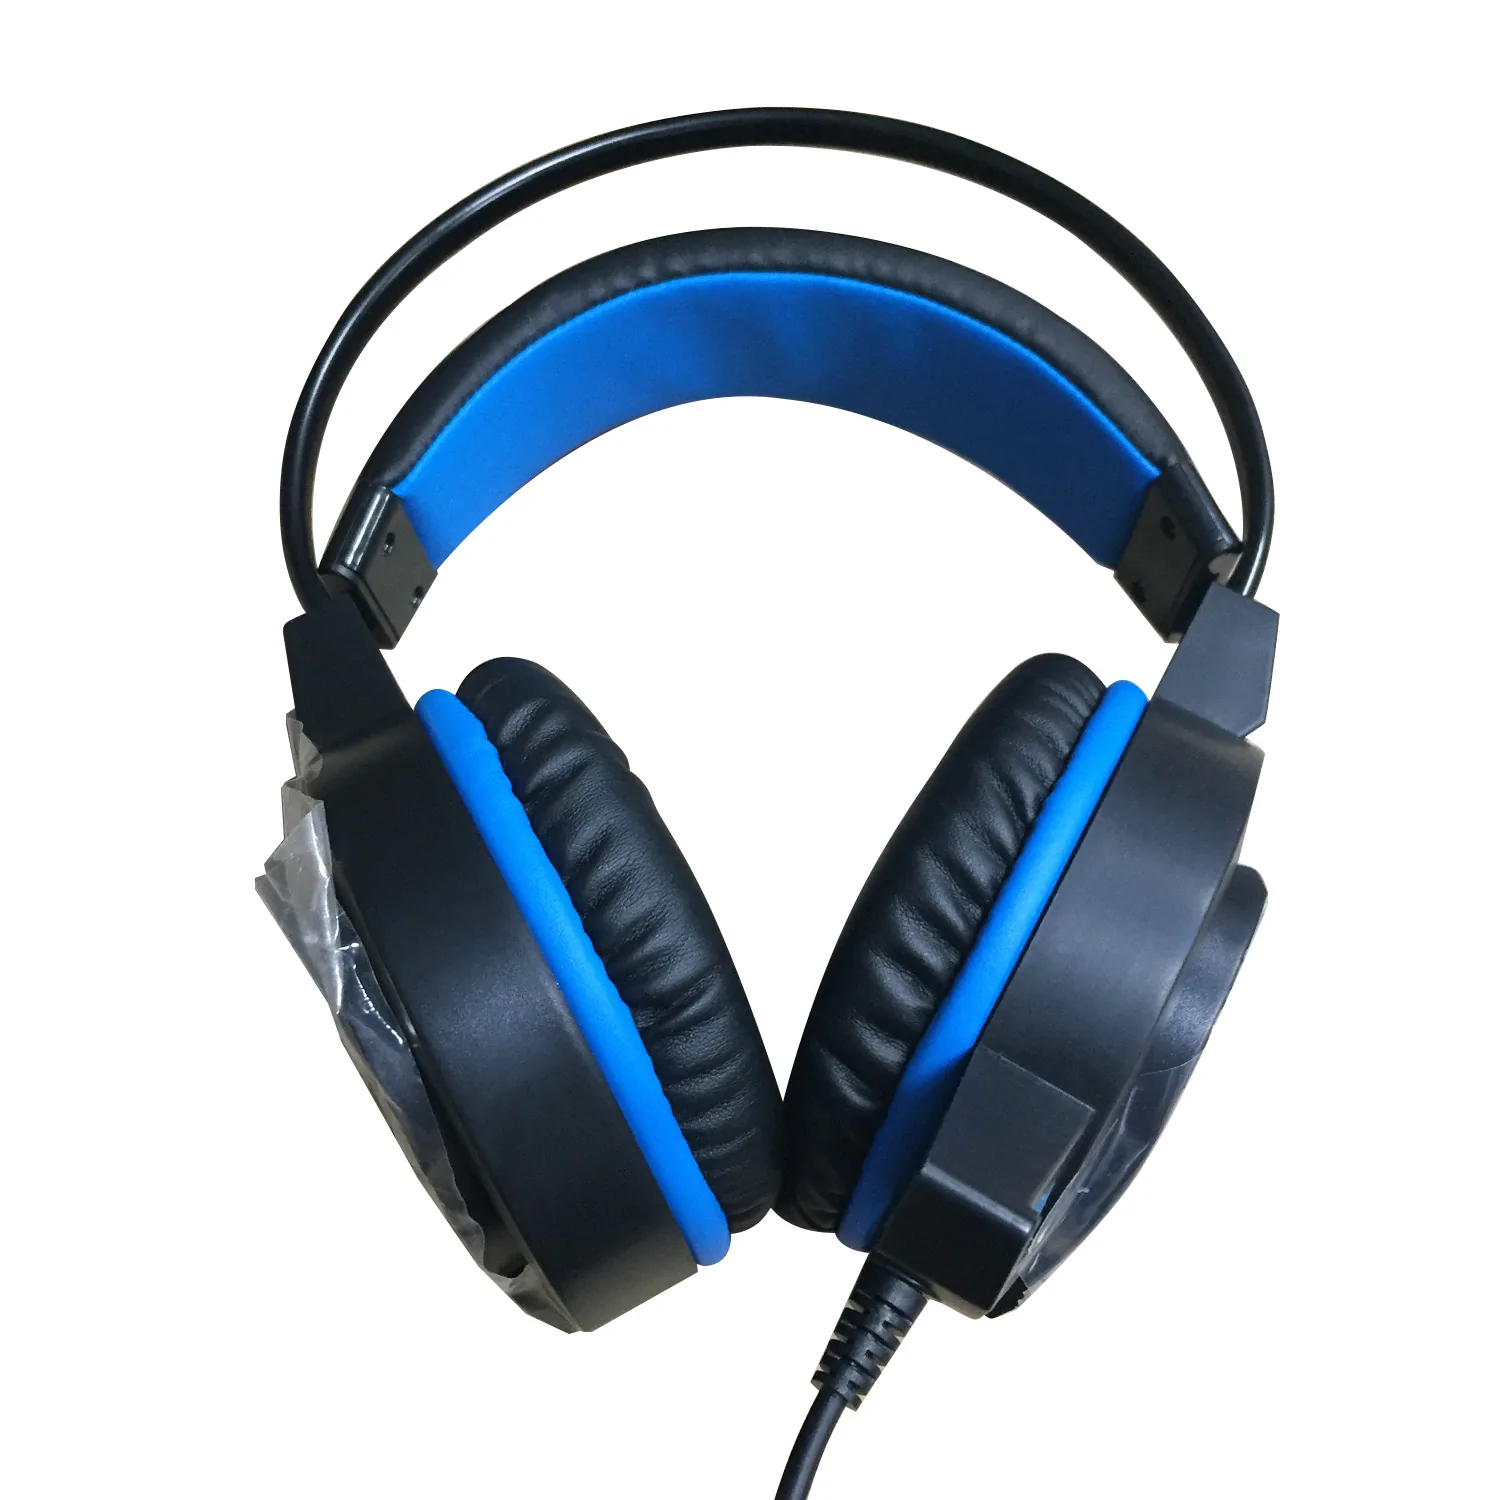 Black & Blue Gaming USB Stereo Headset & Microphone